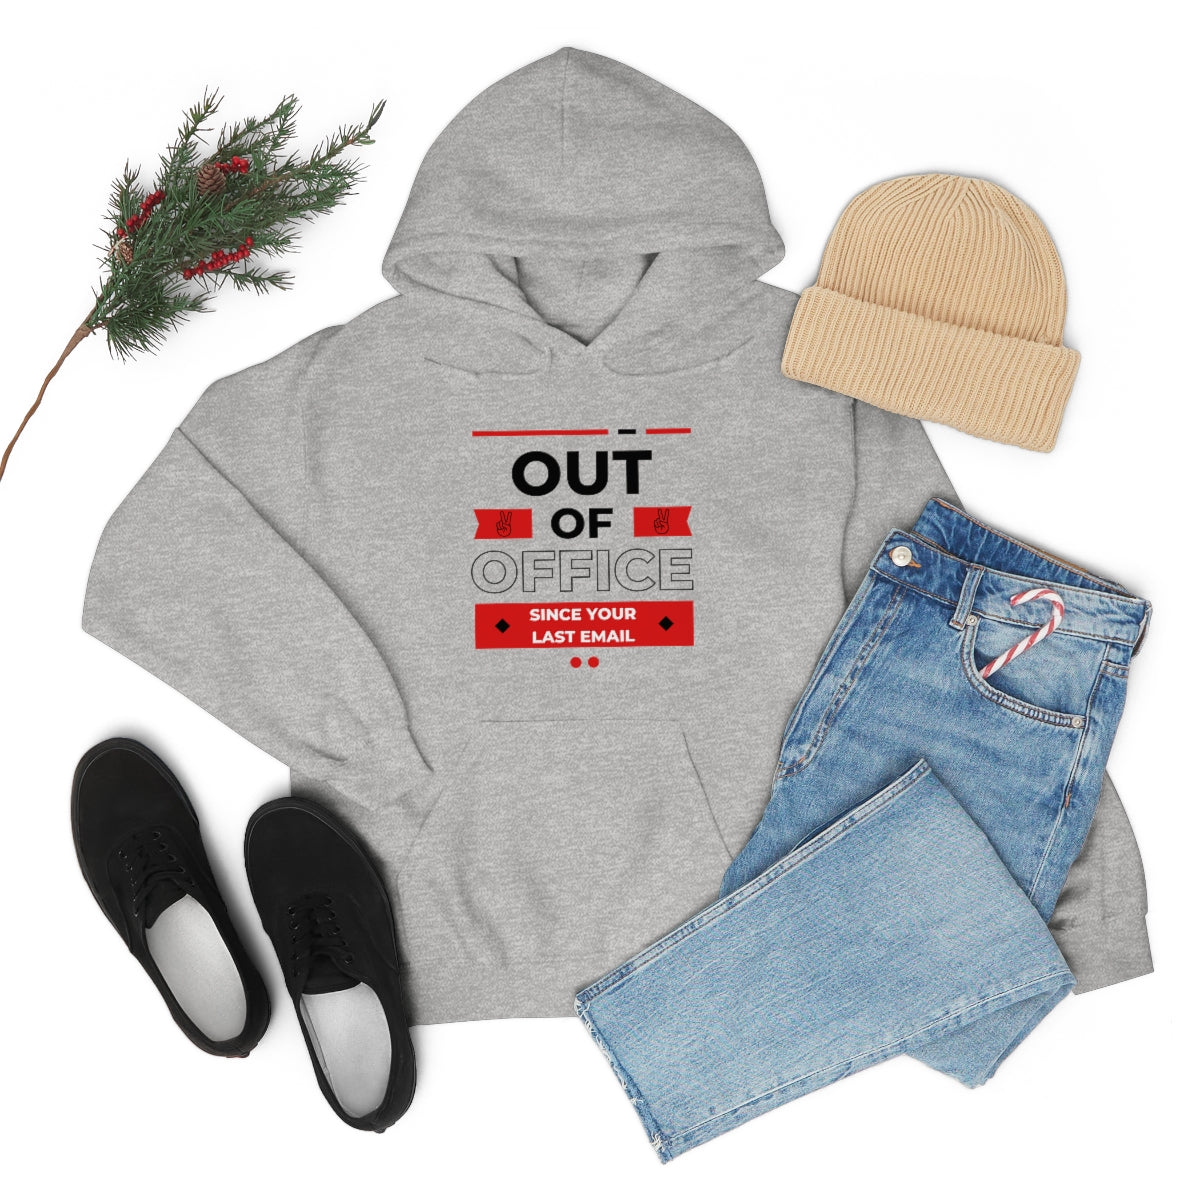 "Out of Office" Unisex Hooded Sweatshirt